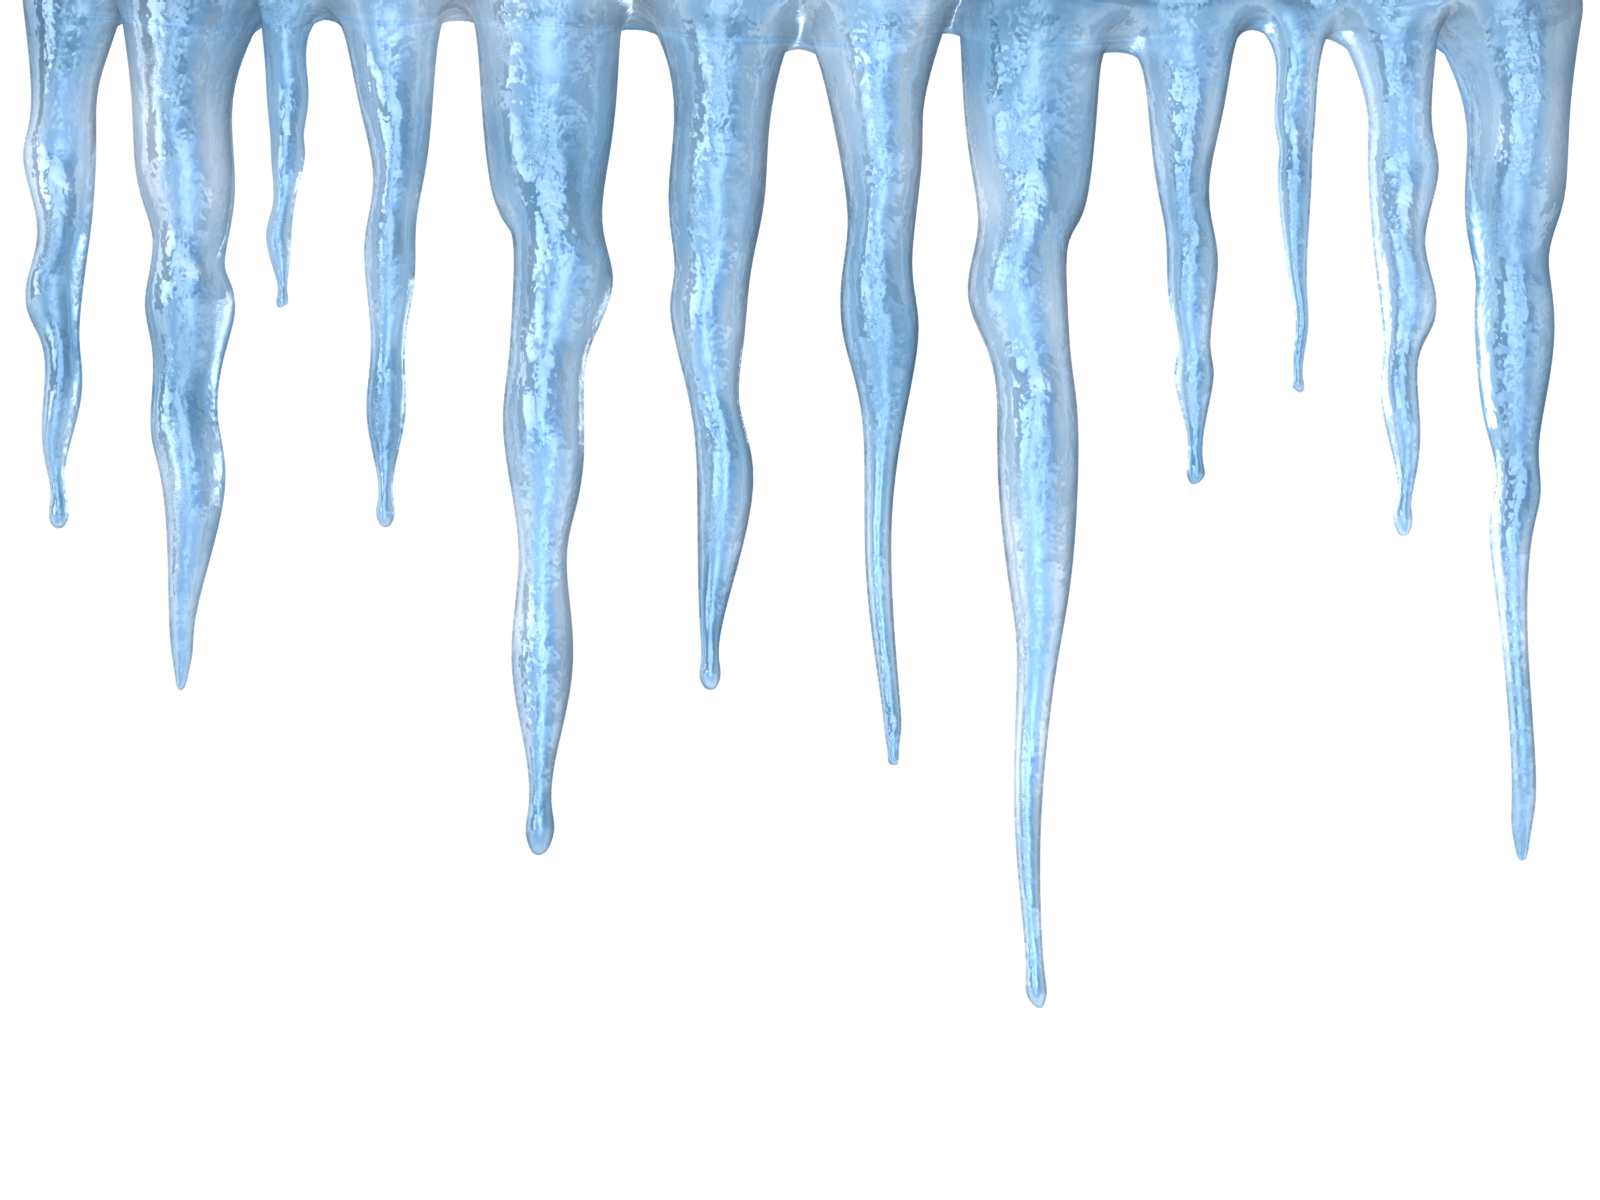 icicle clipart stalactite